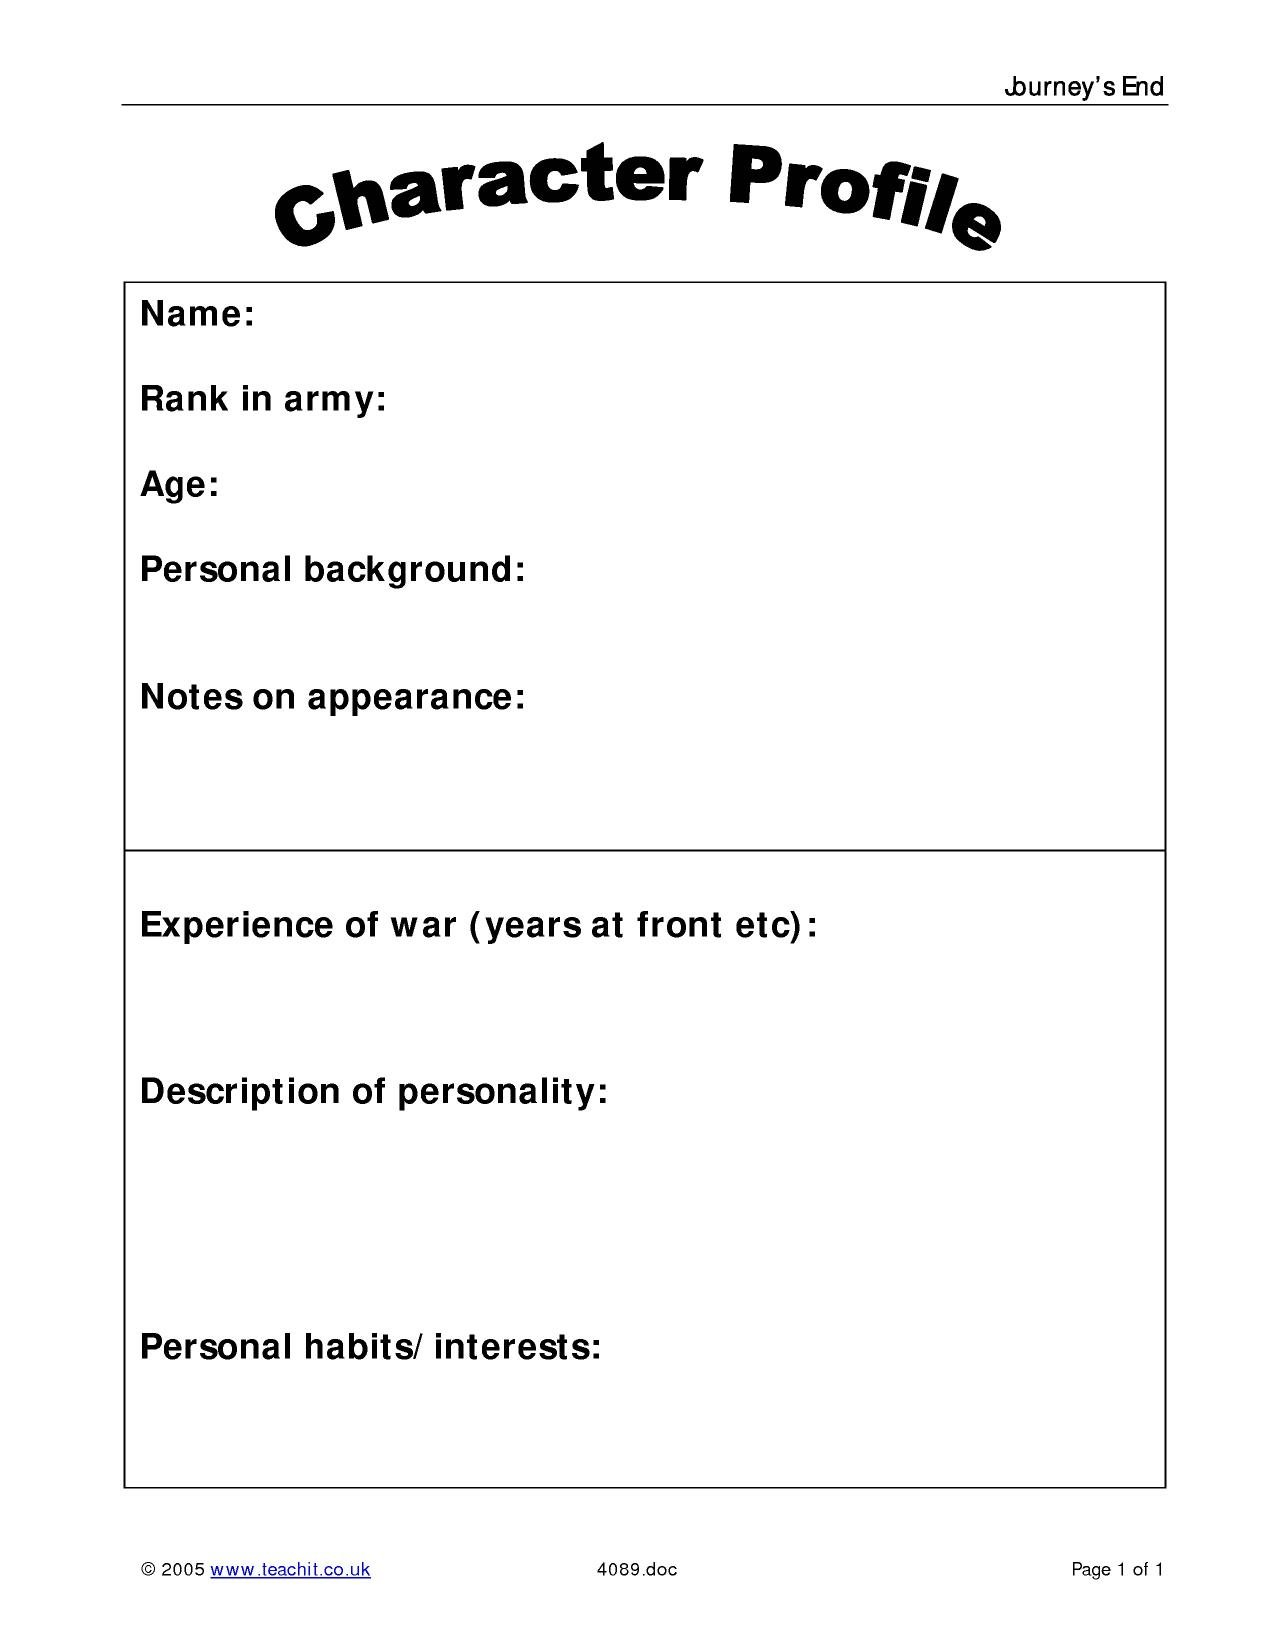 Character Profile And Character Profile Worksheet